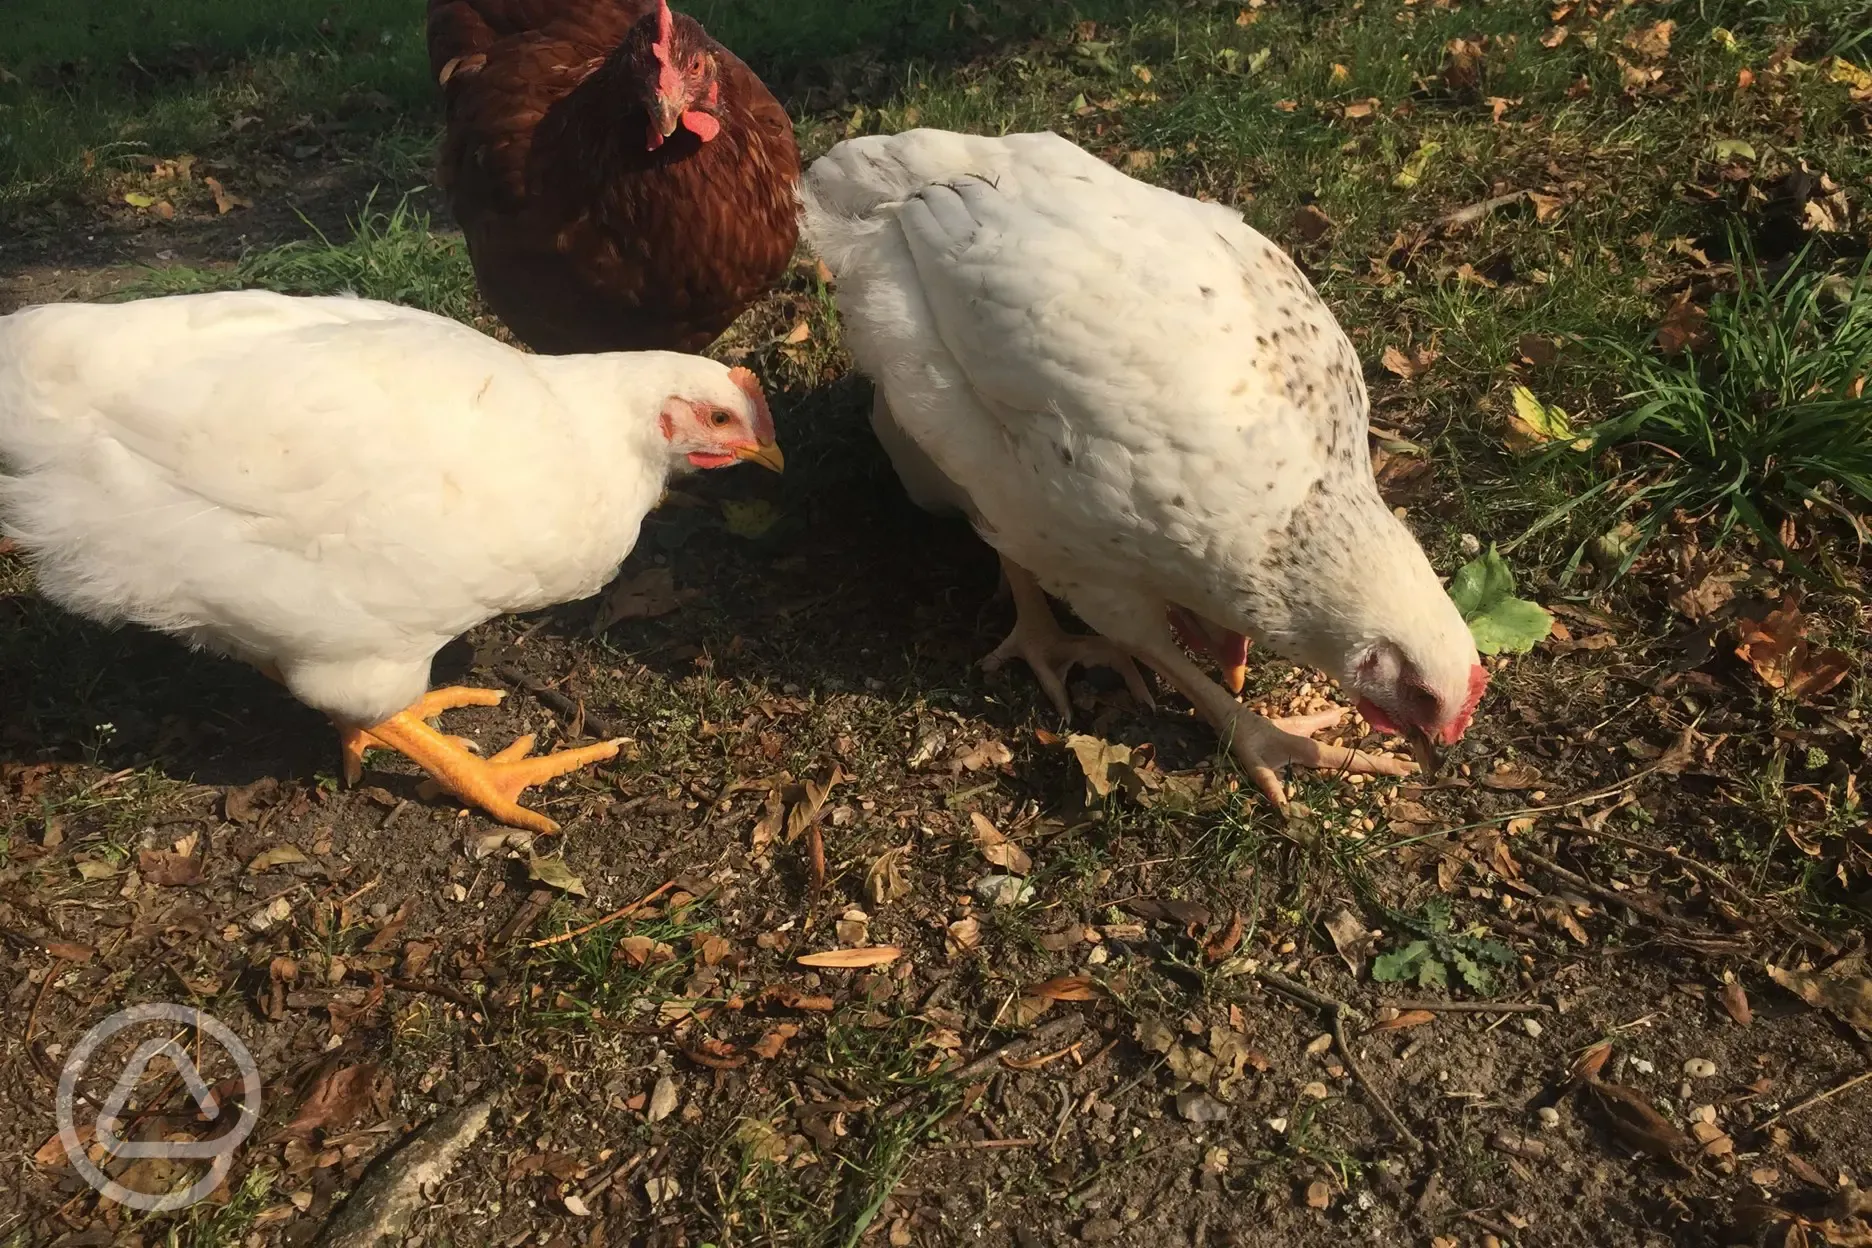 A haven for animals, wildlife and nature. Friendly chickens!